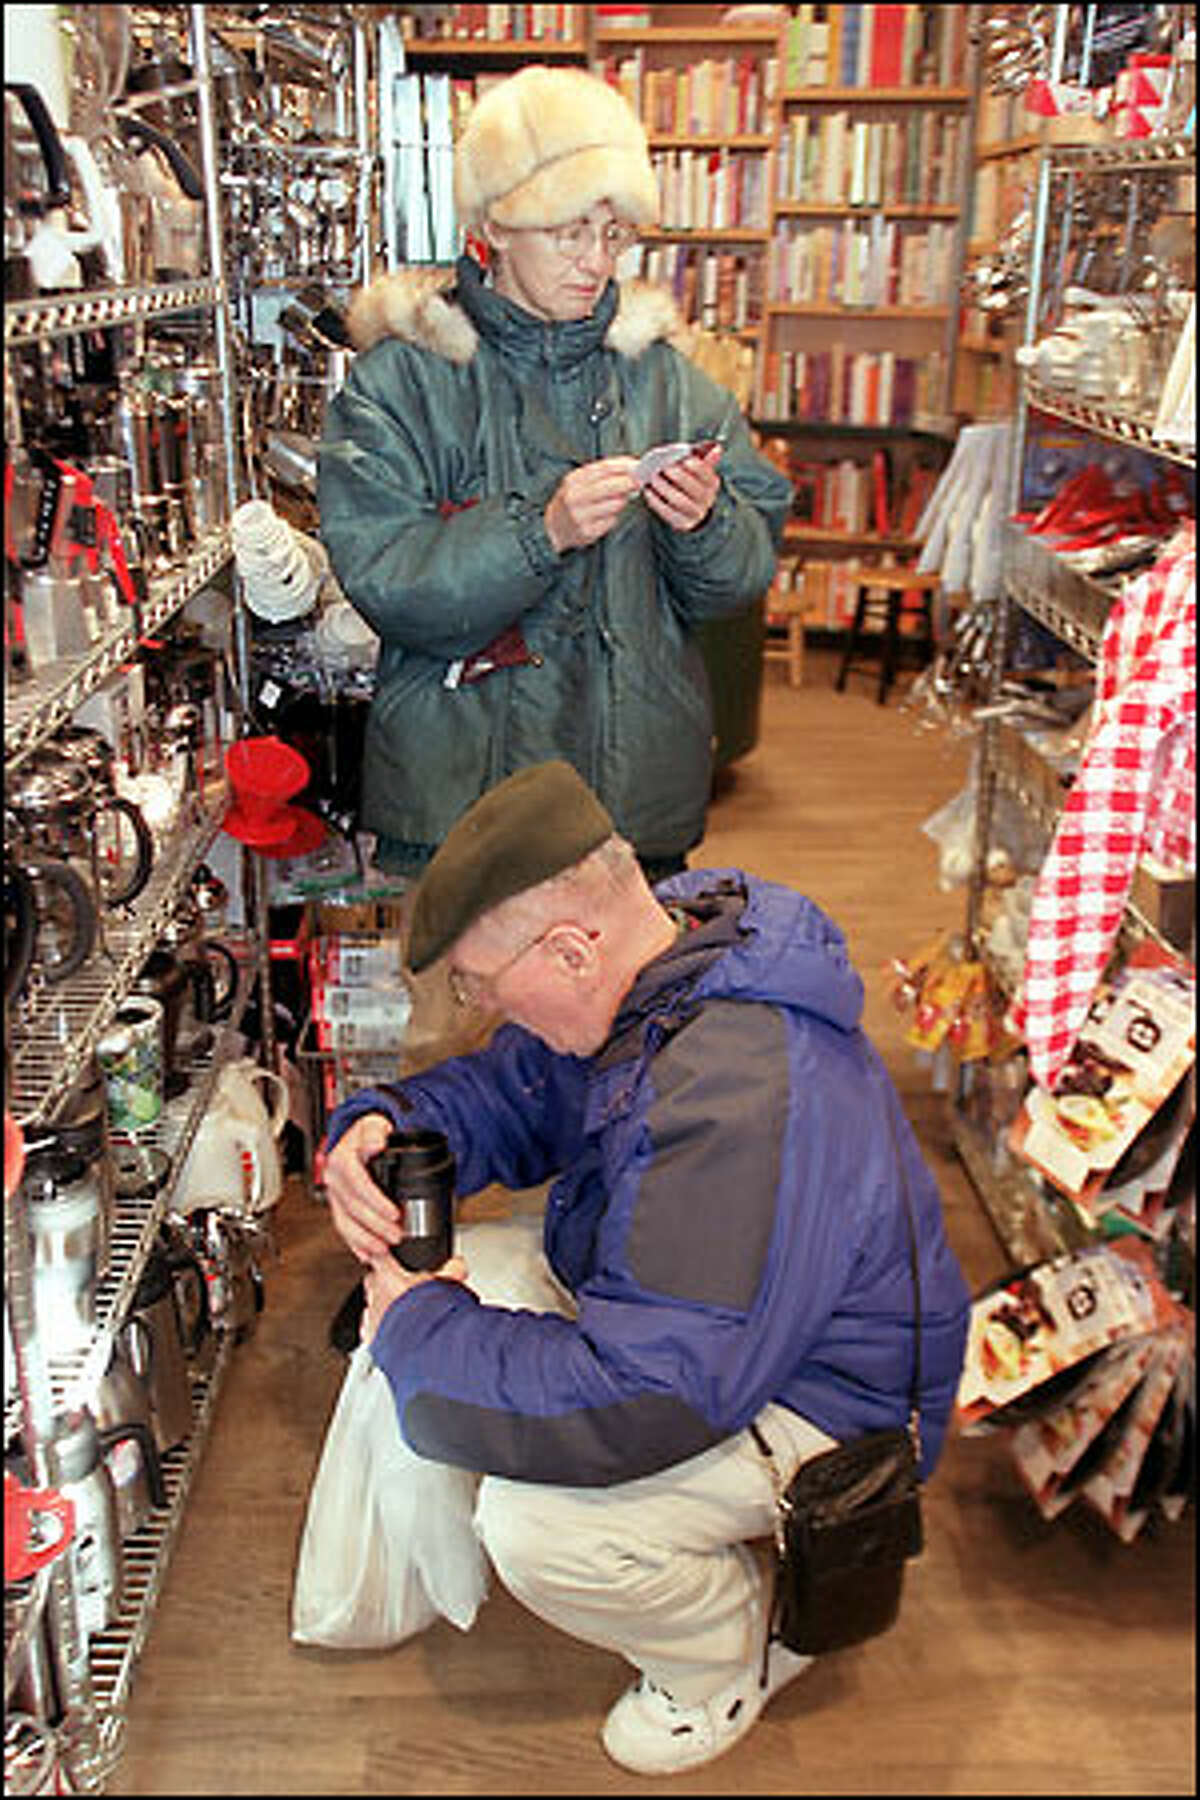 Ray and Marguerite Butz of Michigan check out the Sur La Table store in Pike Place Market. They say they go to the store when they're in Seattle and find things they can't find anywhere else. The business was founded by Shirley Collins in 1972.